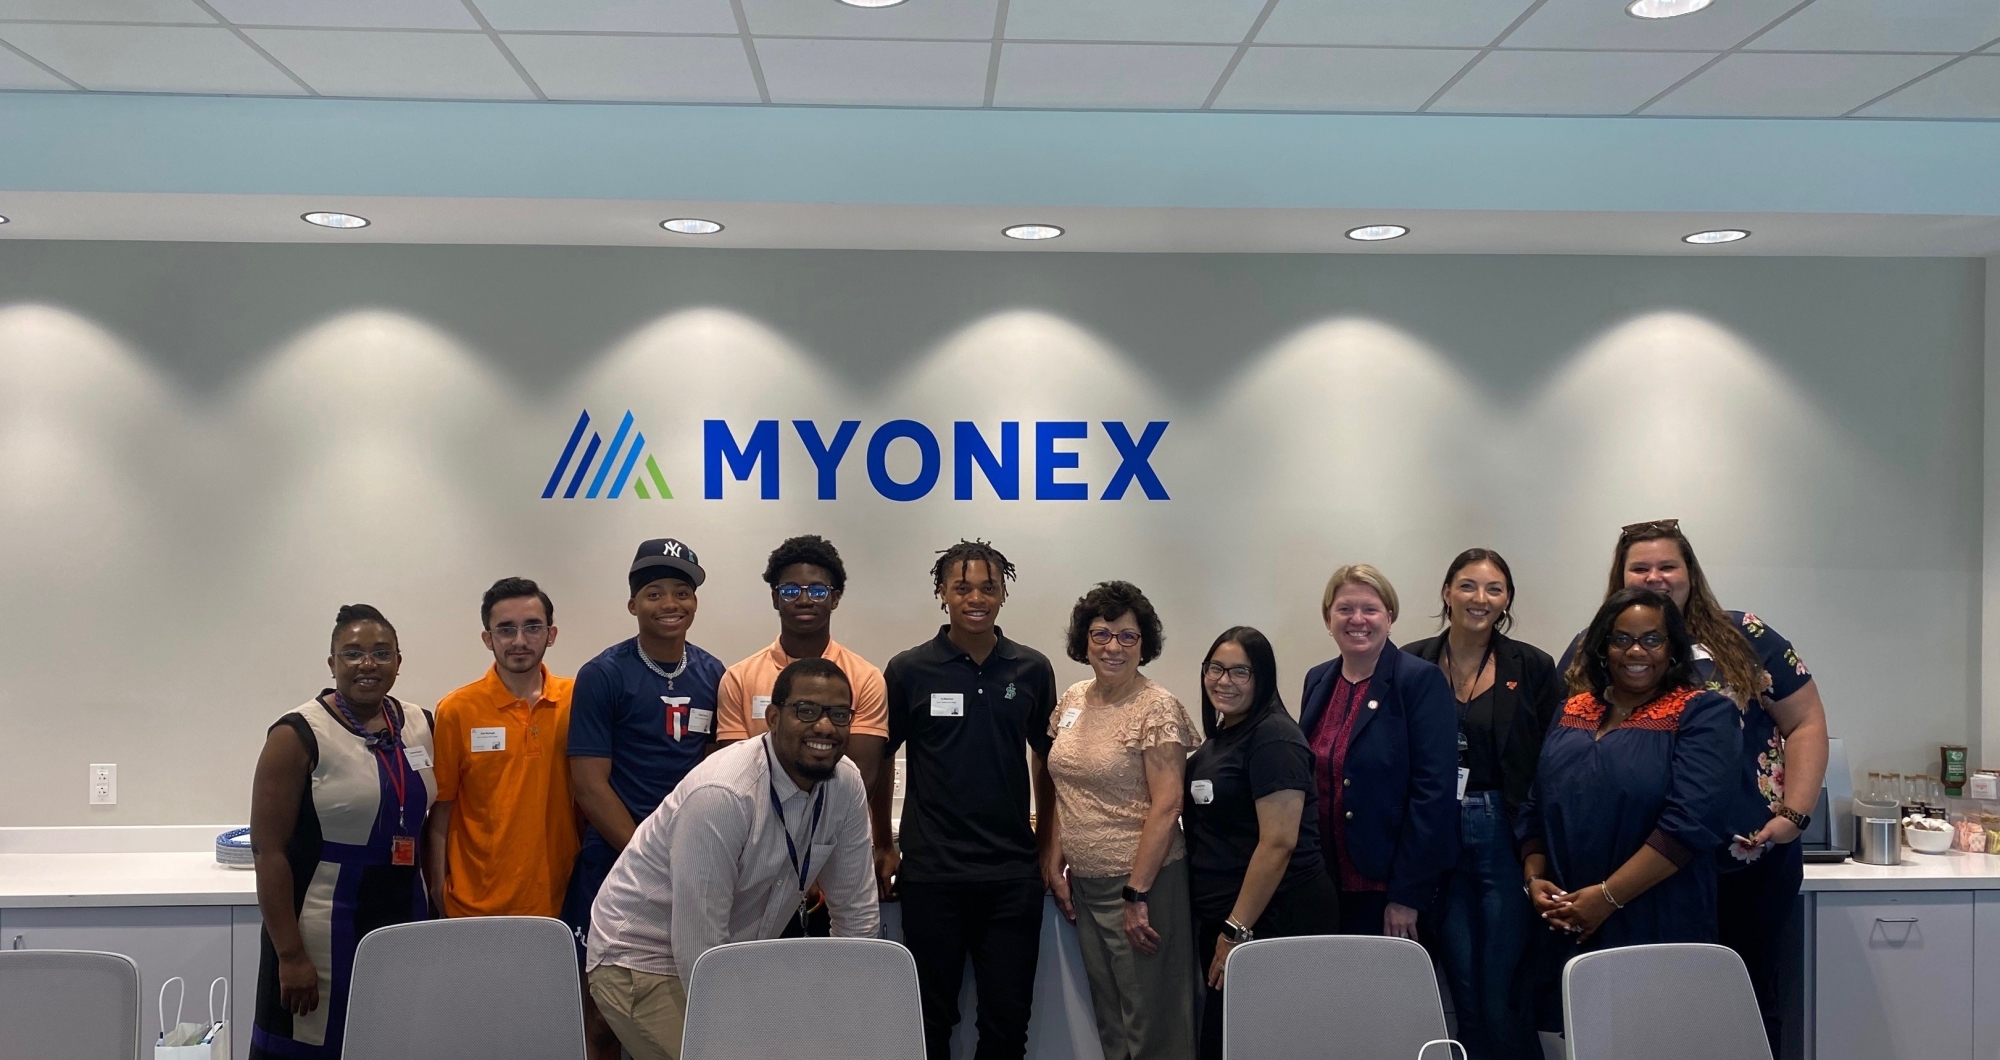 Students in the program visited Myonex, pictured here, along with two other sites in order to gain real world experience in the workforce.